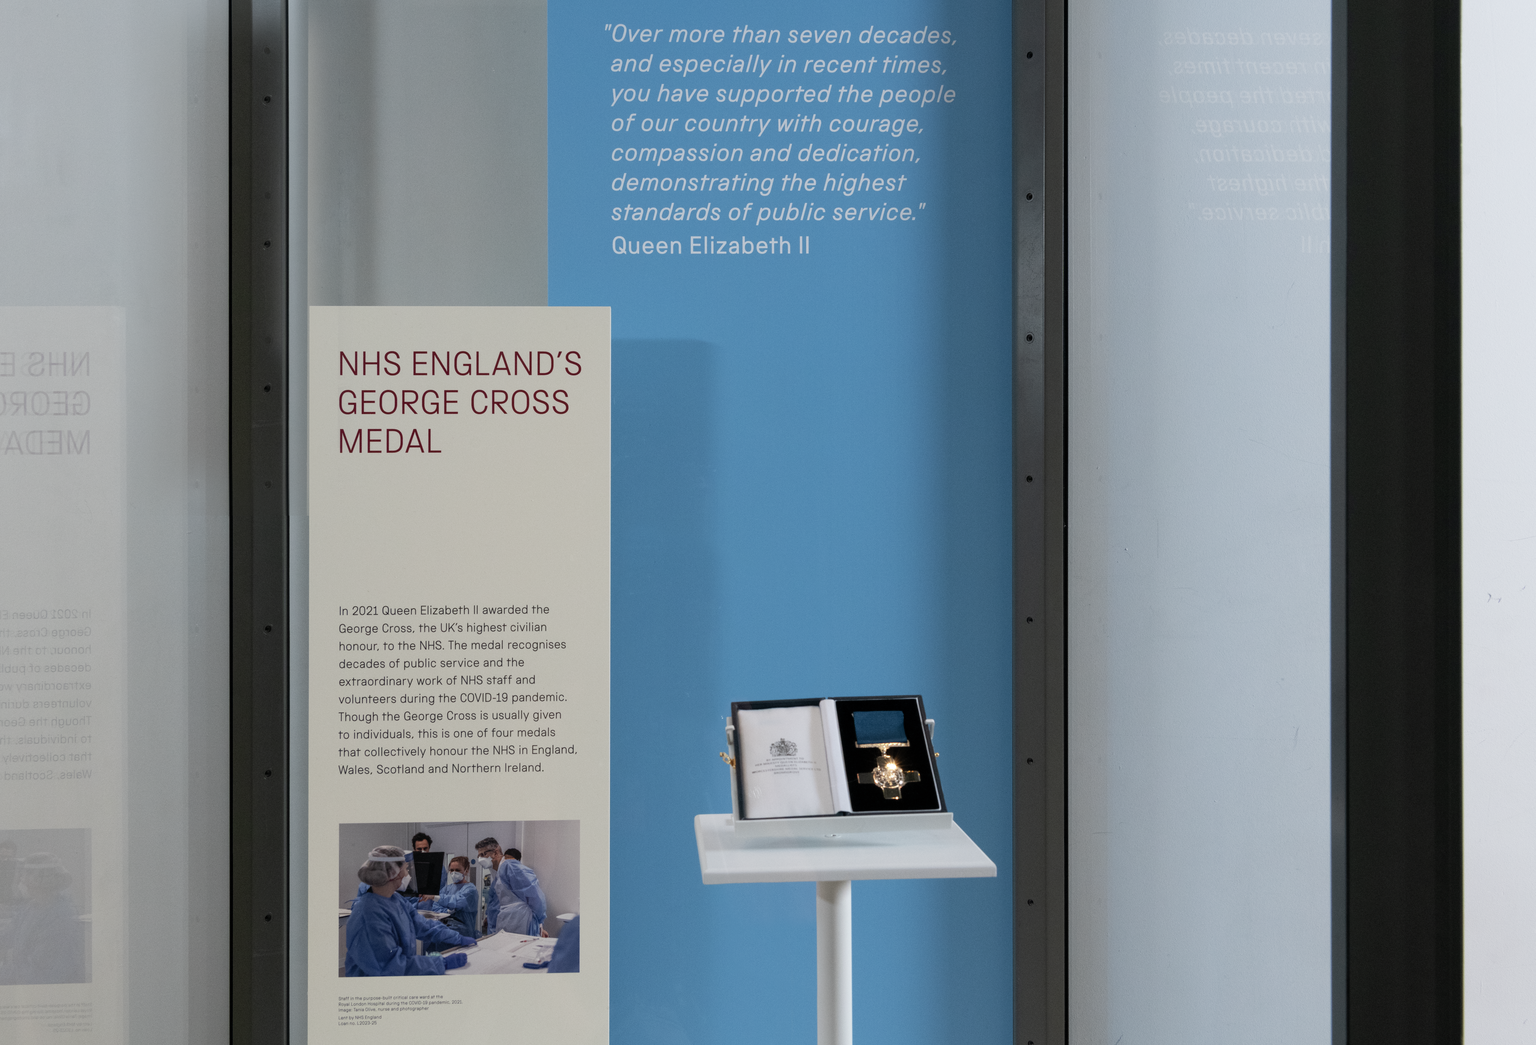 The George Cross medal awarded to NHS England on display in Medicine: The Wellcome Galleries at the Science Museum.